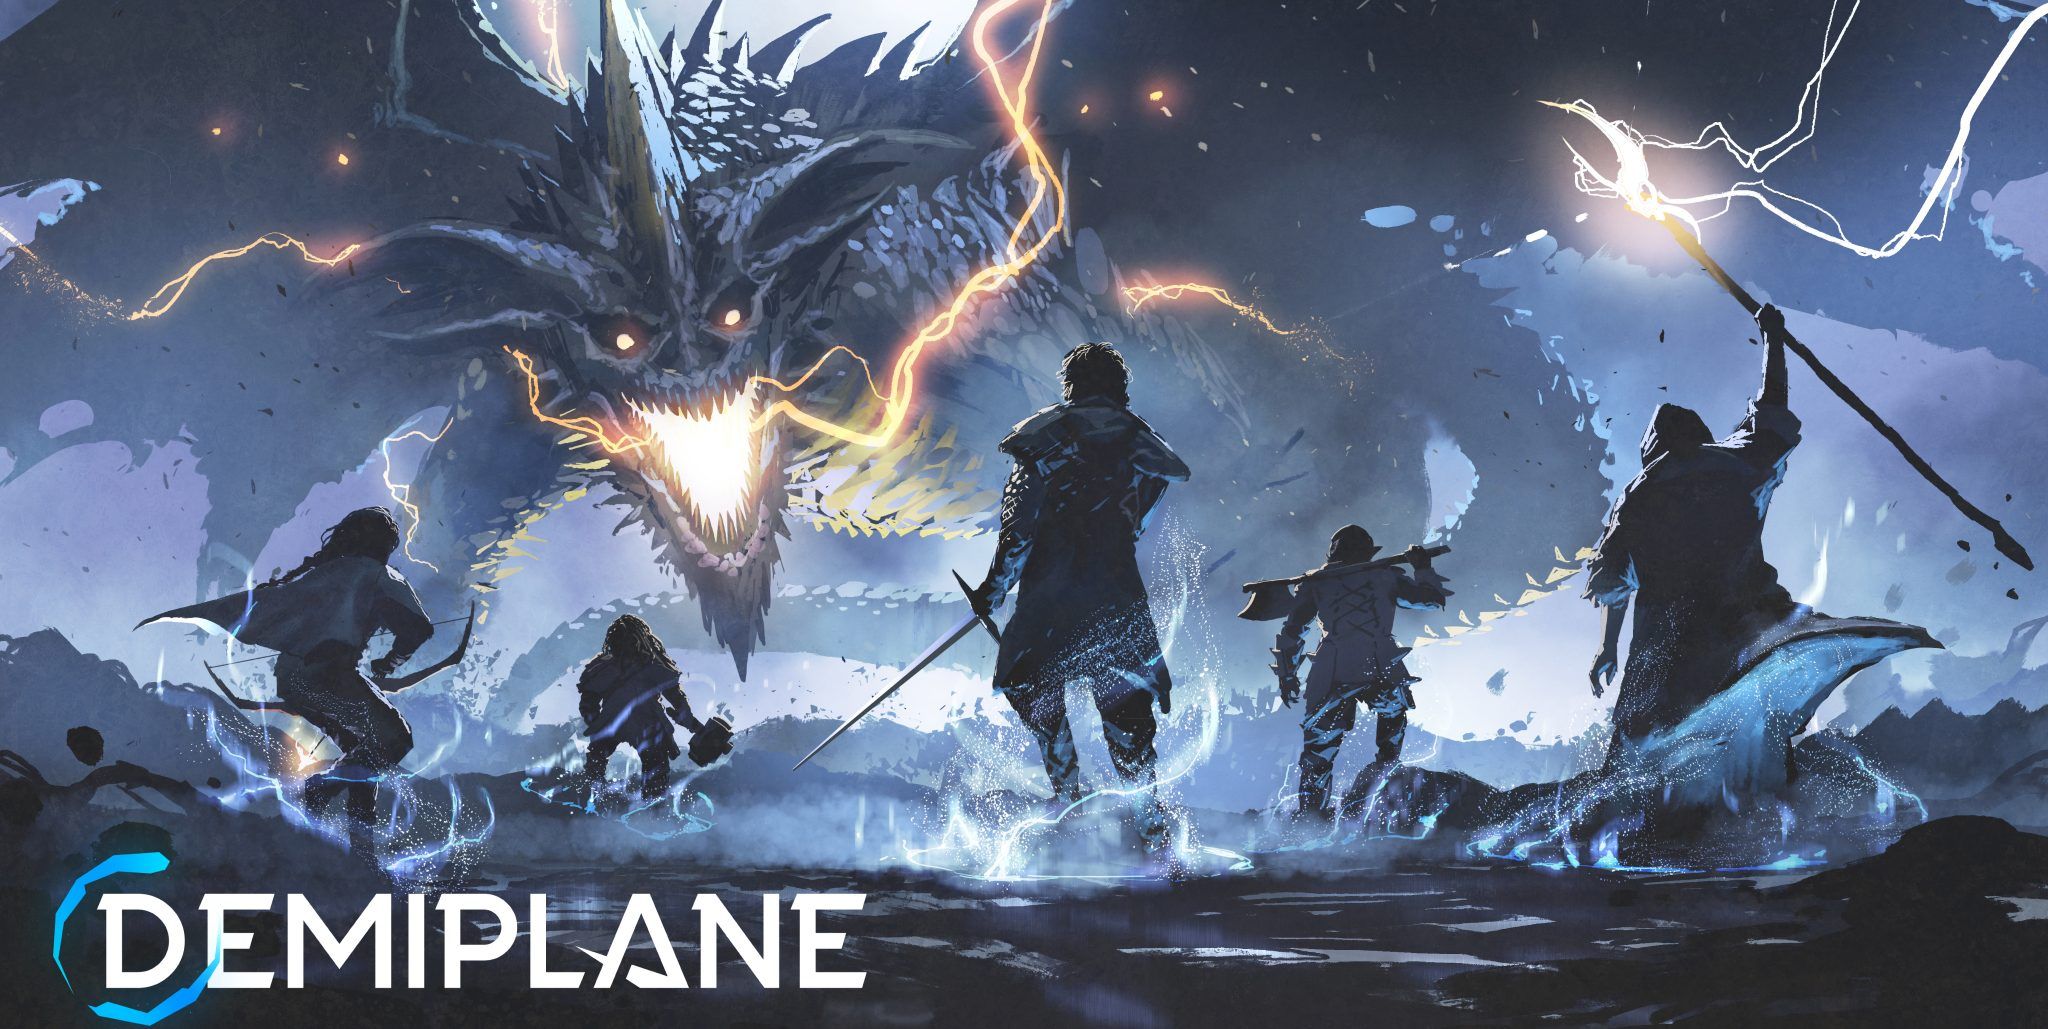 Demiplane Aims To Improve The Online TTRPG Experience By Borrowing From Video Games